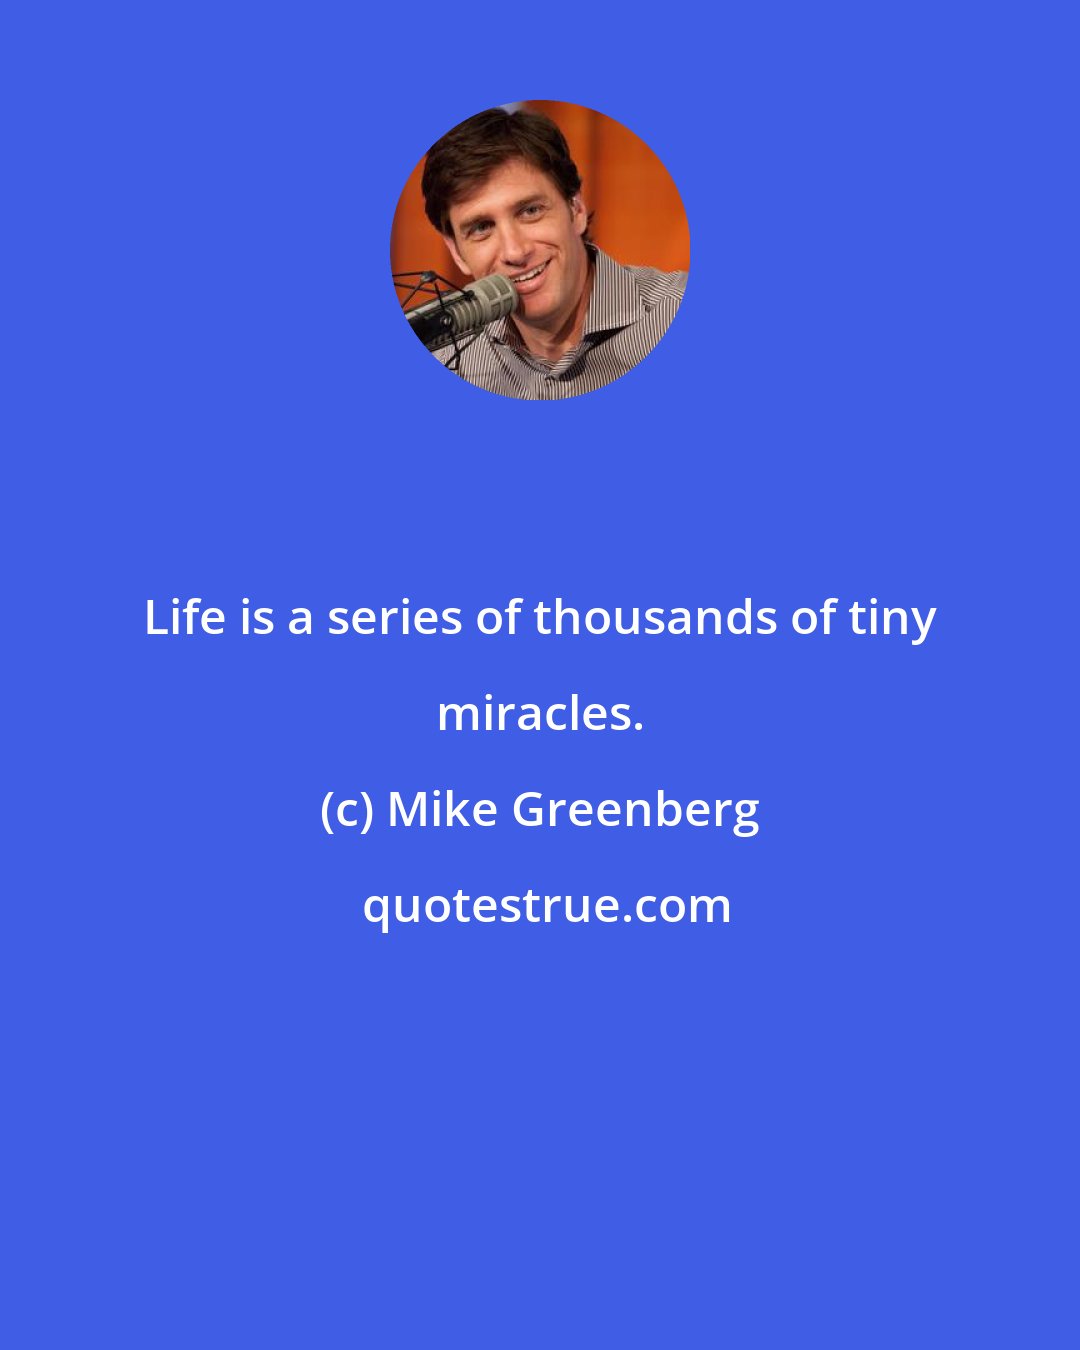 Mike Greenberg: Life is a series of thousands of tiny miracles.